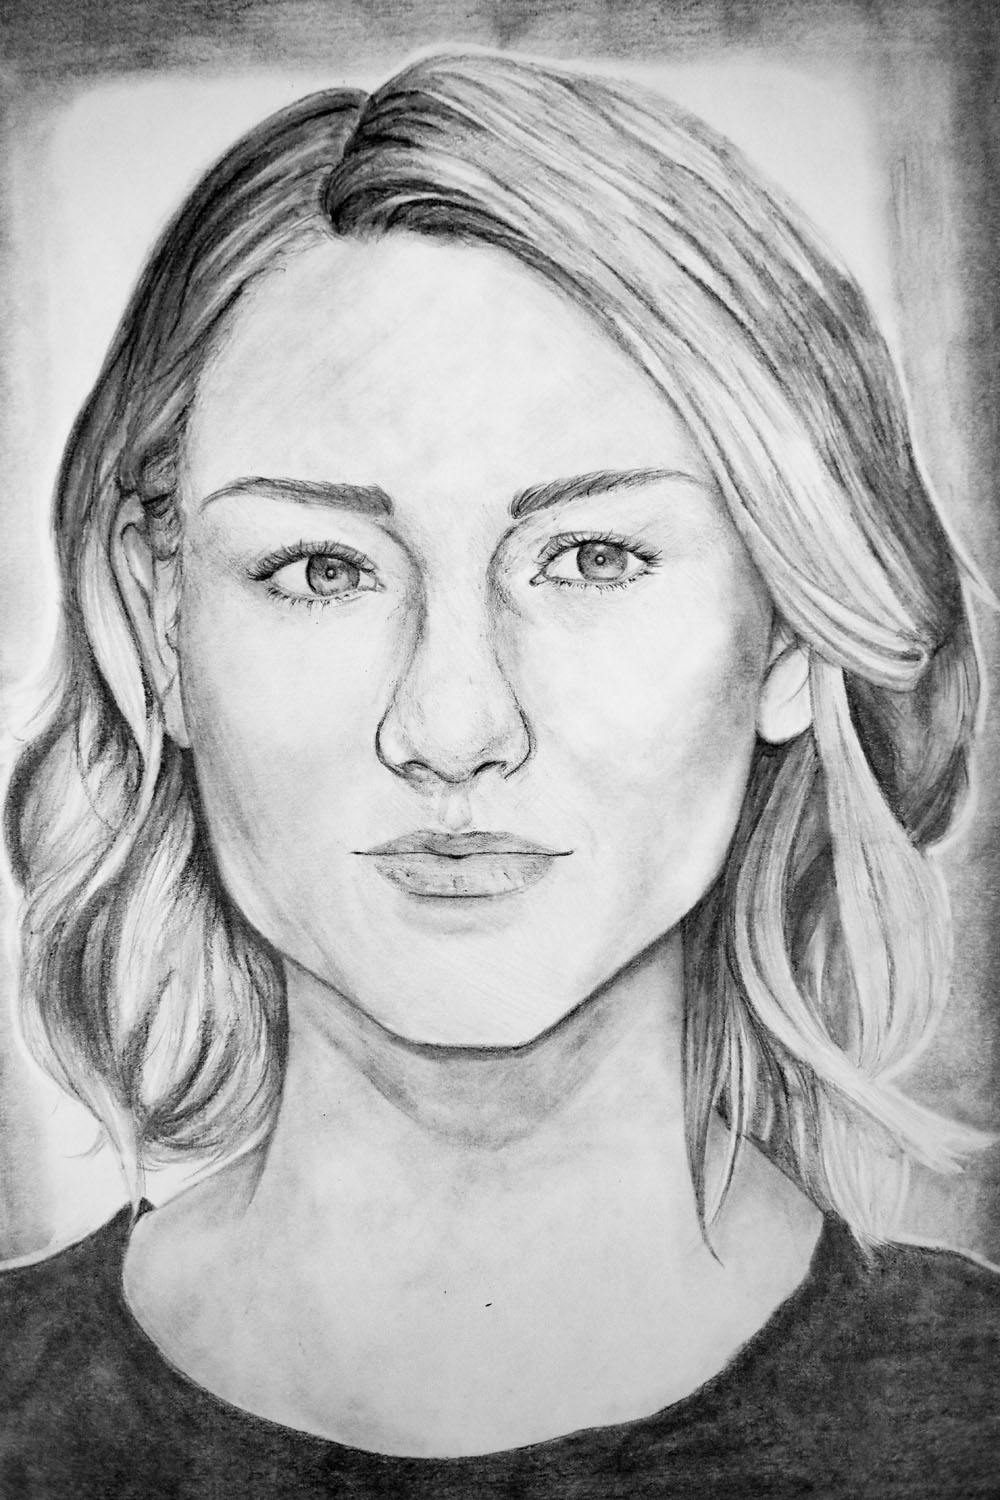 Pencil drawing of young woman